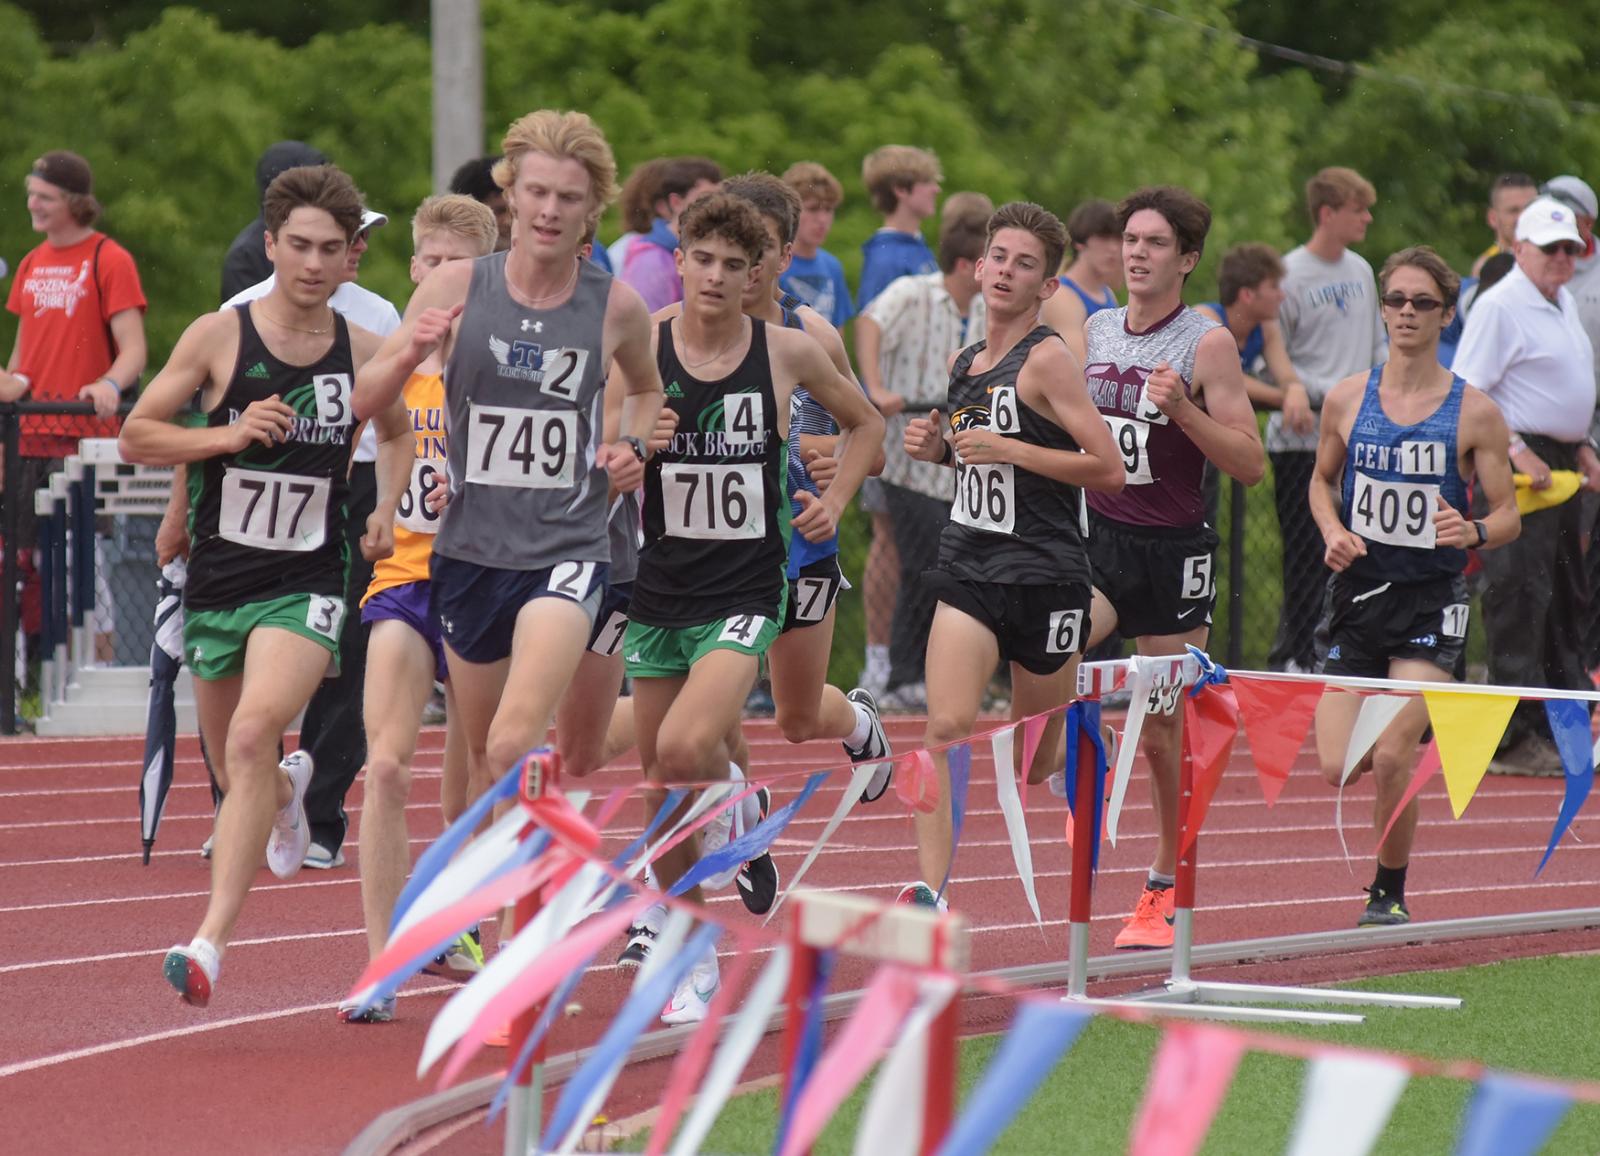 Rock Bridge runner Matthew Hauser, left, runs during the 3,200 meter run on Thursday, May 27, 2021 at Adkins Stadium in Jefferson City. Hauser placed second in the race 9 minutes 18.50 seconds. Megan Matty/Missourian